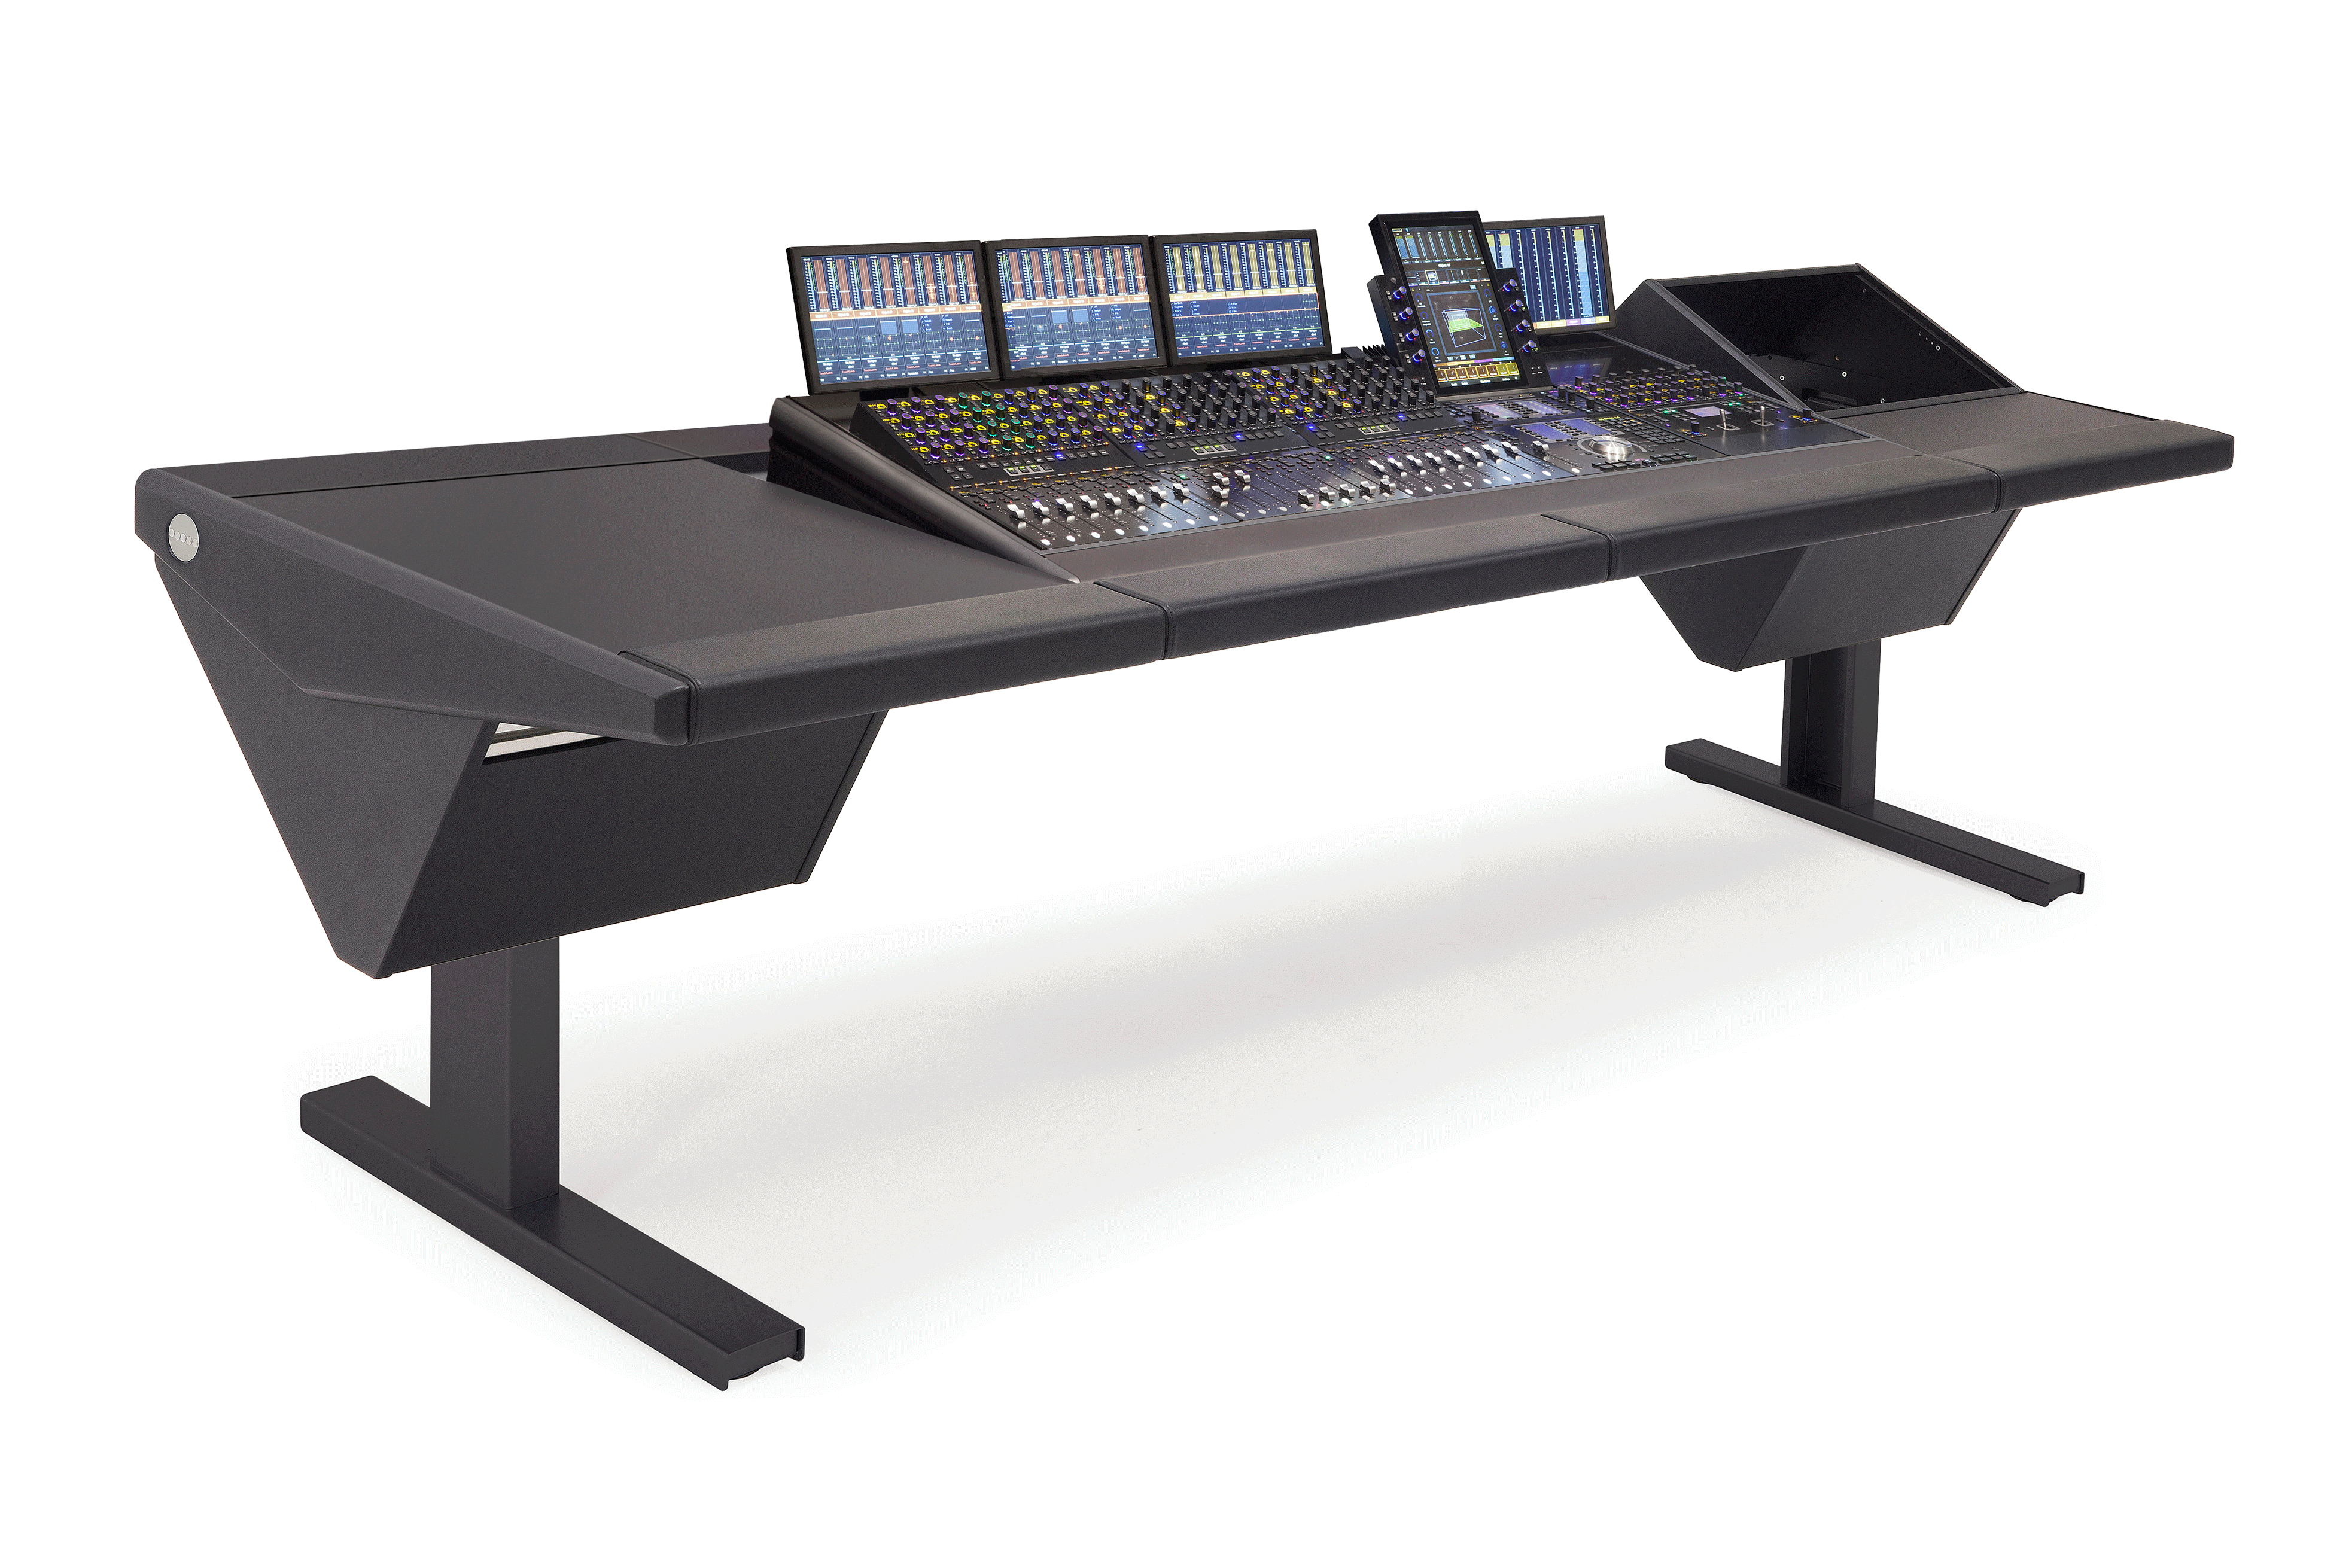 S4 - 5 Foot Wide Base System with Desk (L) and Rack (R)